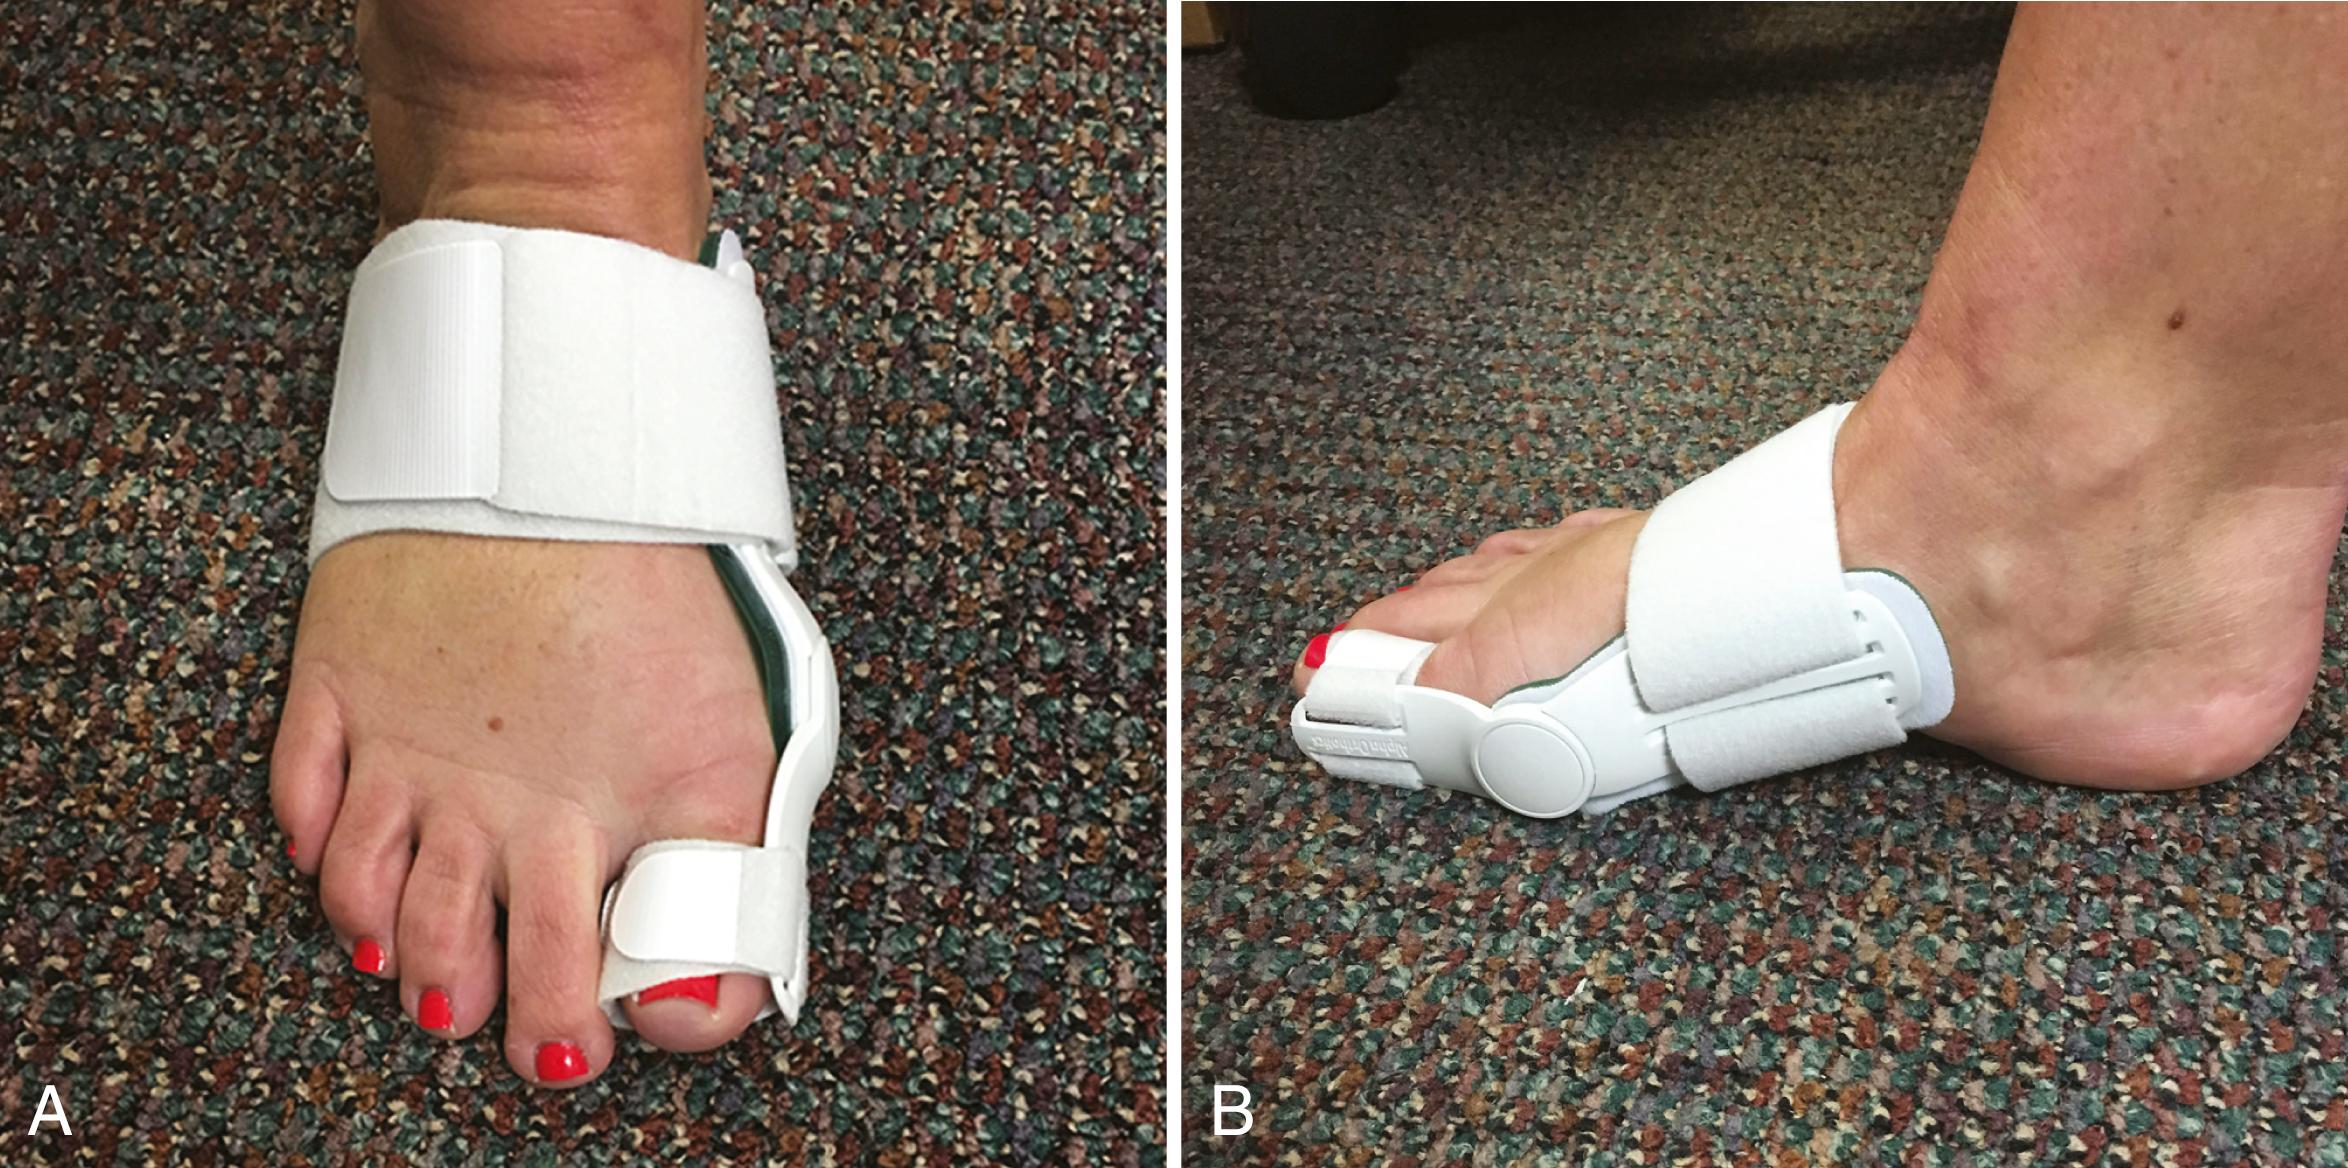 FIGURE 82.25, A and B, Hallux valgus night splint to be worn for 6 to 8 weeks after dressing changes are completed.